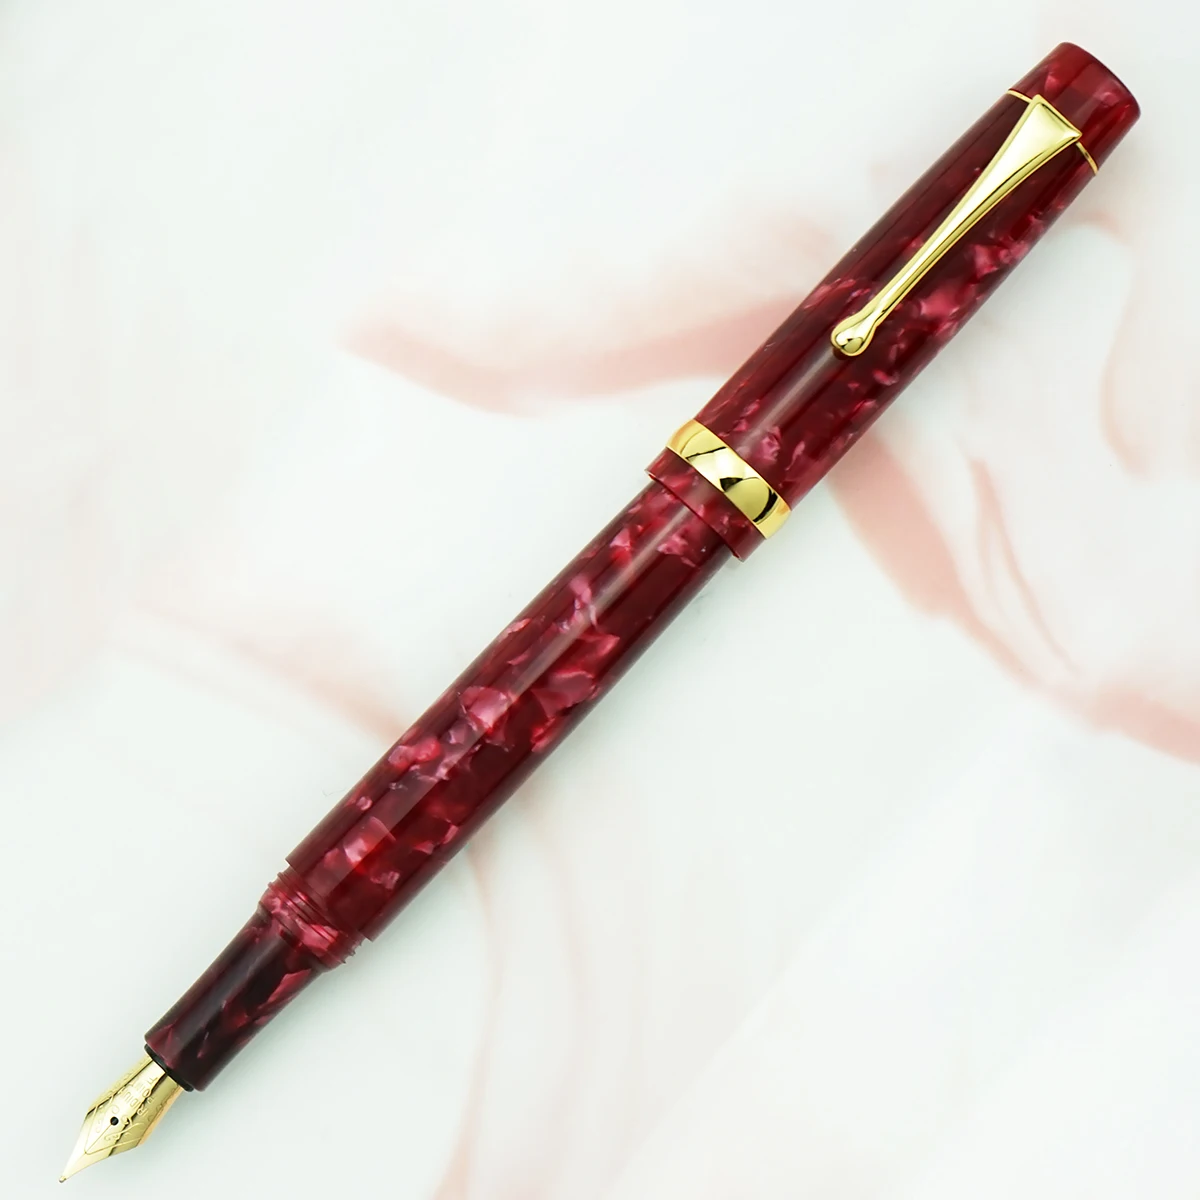 Jinhao Resin Acrylic Red Fountain Pen Beautiful Ink Pen with Converter EF/F/Bent Nib Business Office School Writing Gift Pen